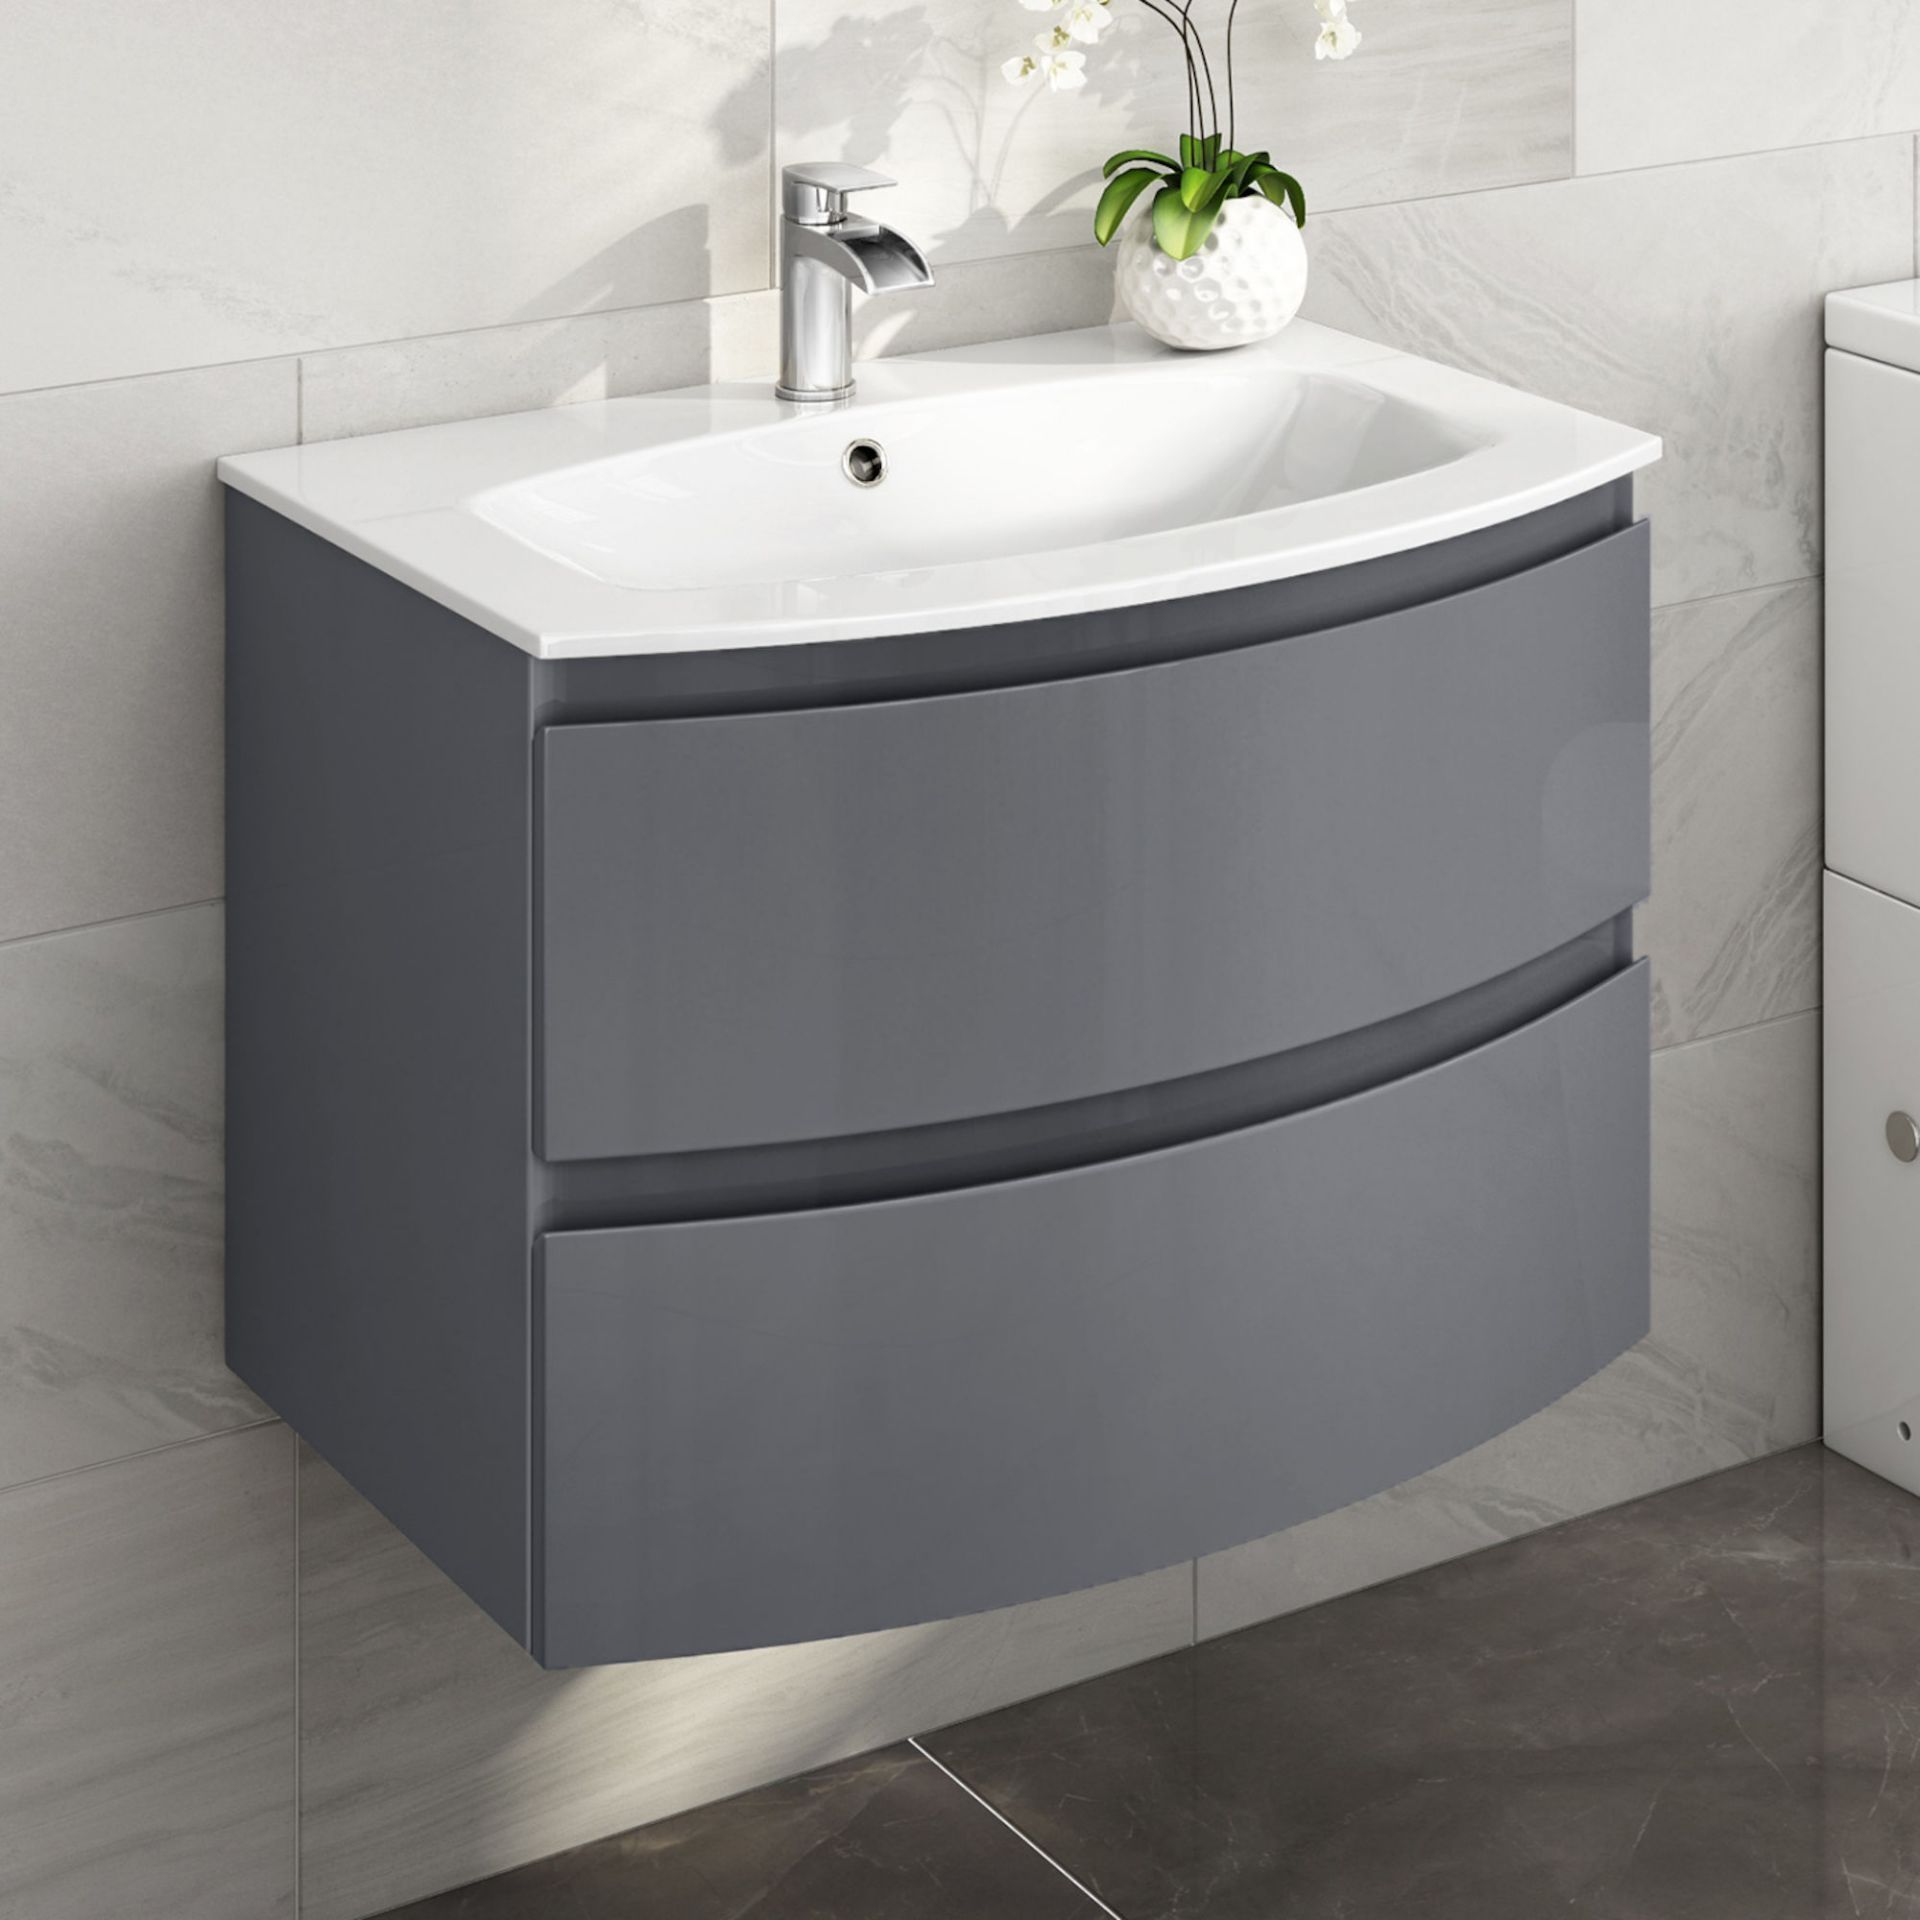 New & Boxed 700mm Amelie Gloss Grey Curved Vanity Unit - Wall Hung. RRP £999.99.